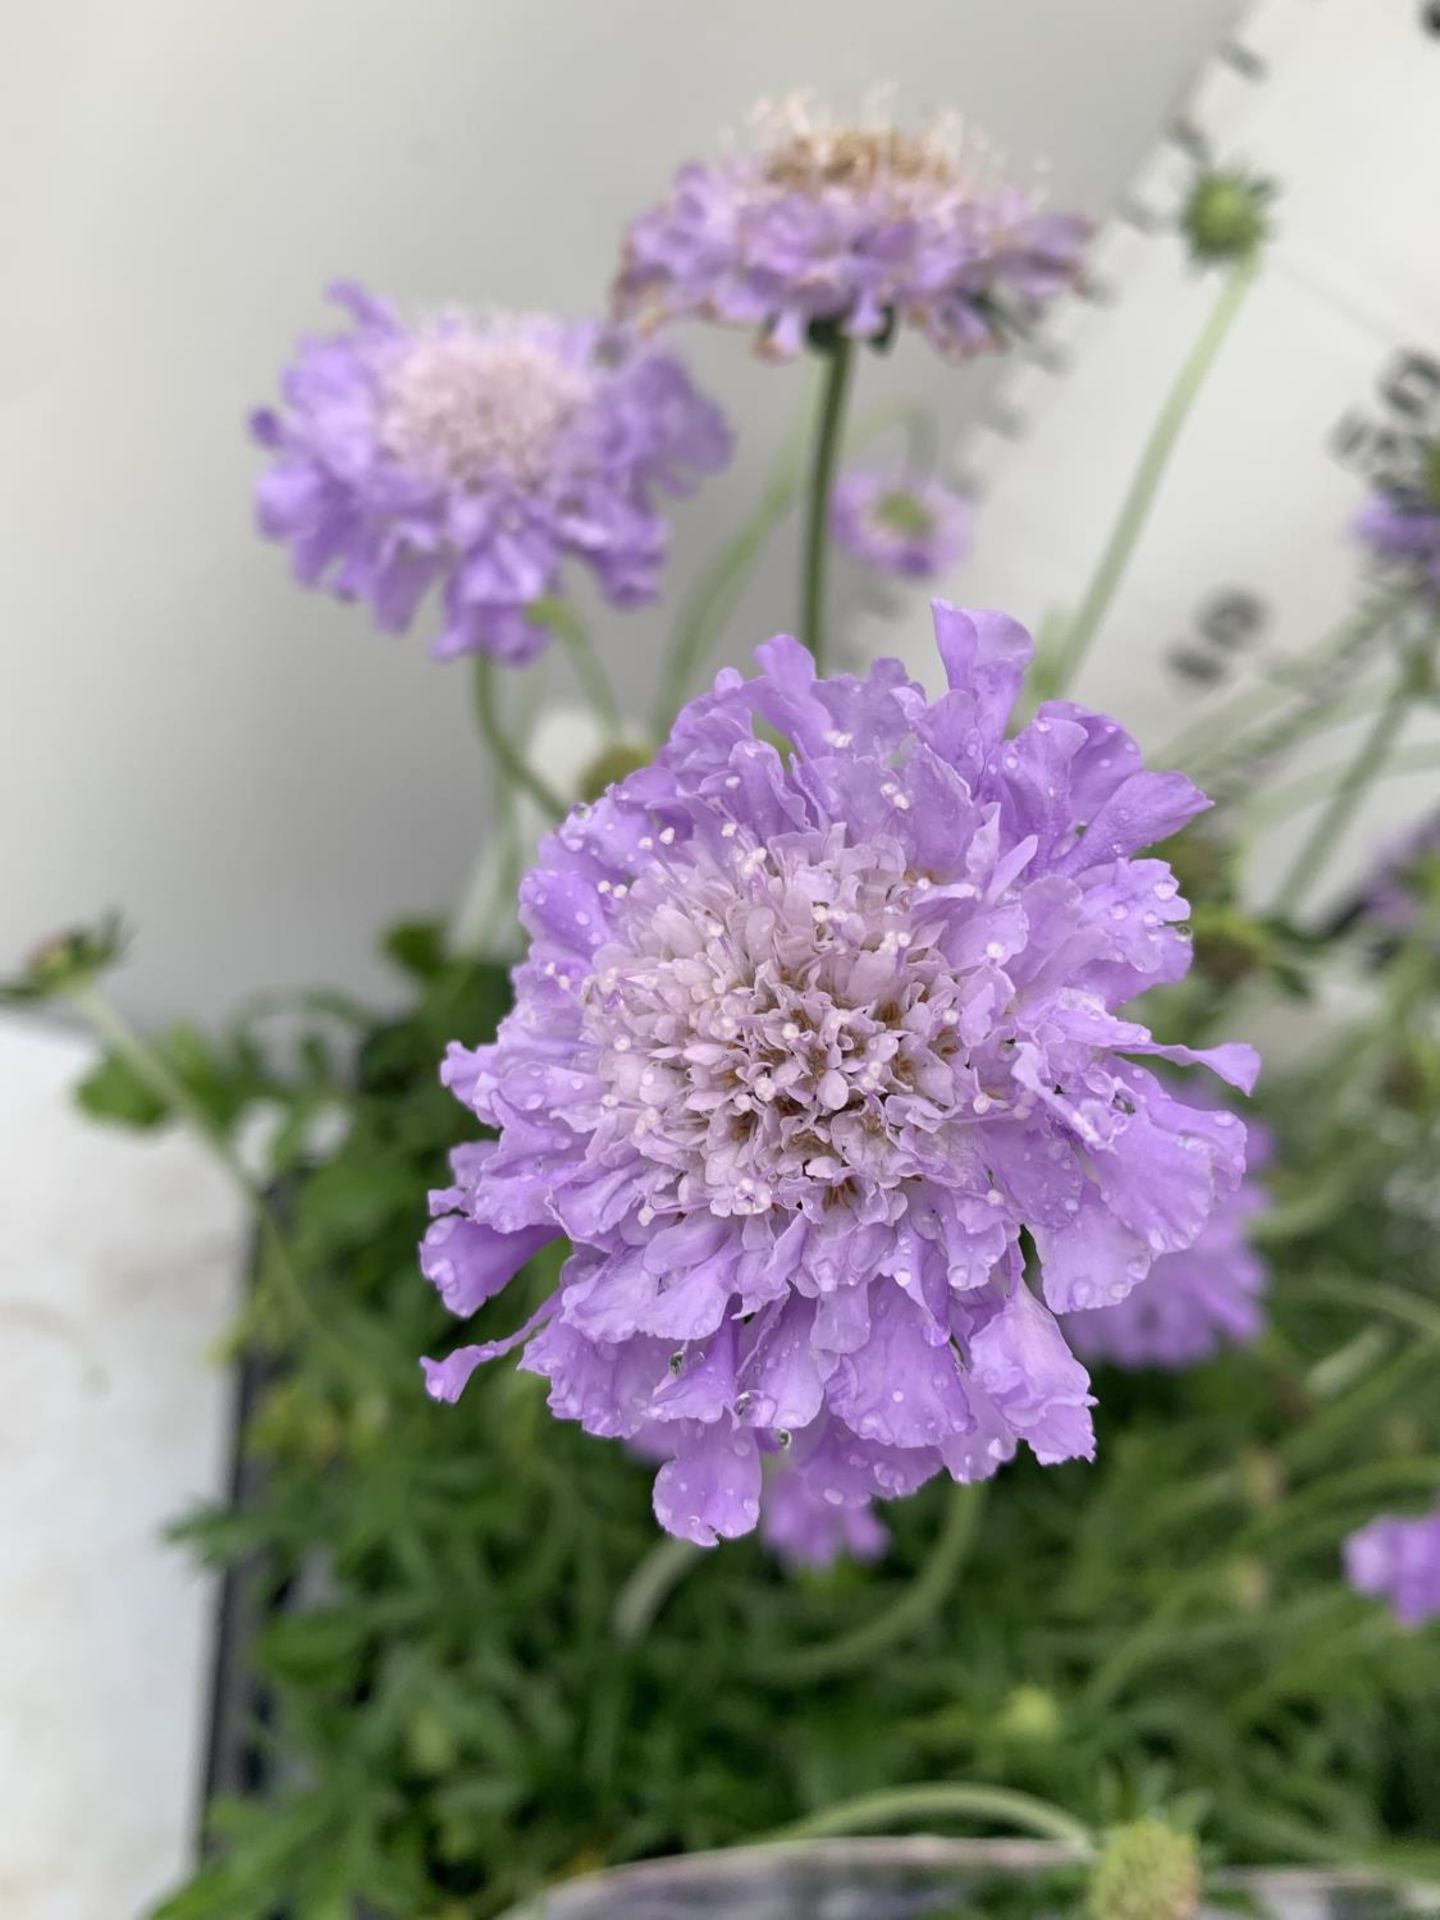 SIX SCABIOSA BUTTERFLY BLUE IN 2 LTR POTS 50-60CM TALL TO BE SOLD FOR THE SIX PLUS VAT - Bild 2 aus 5